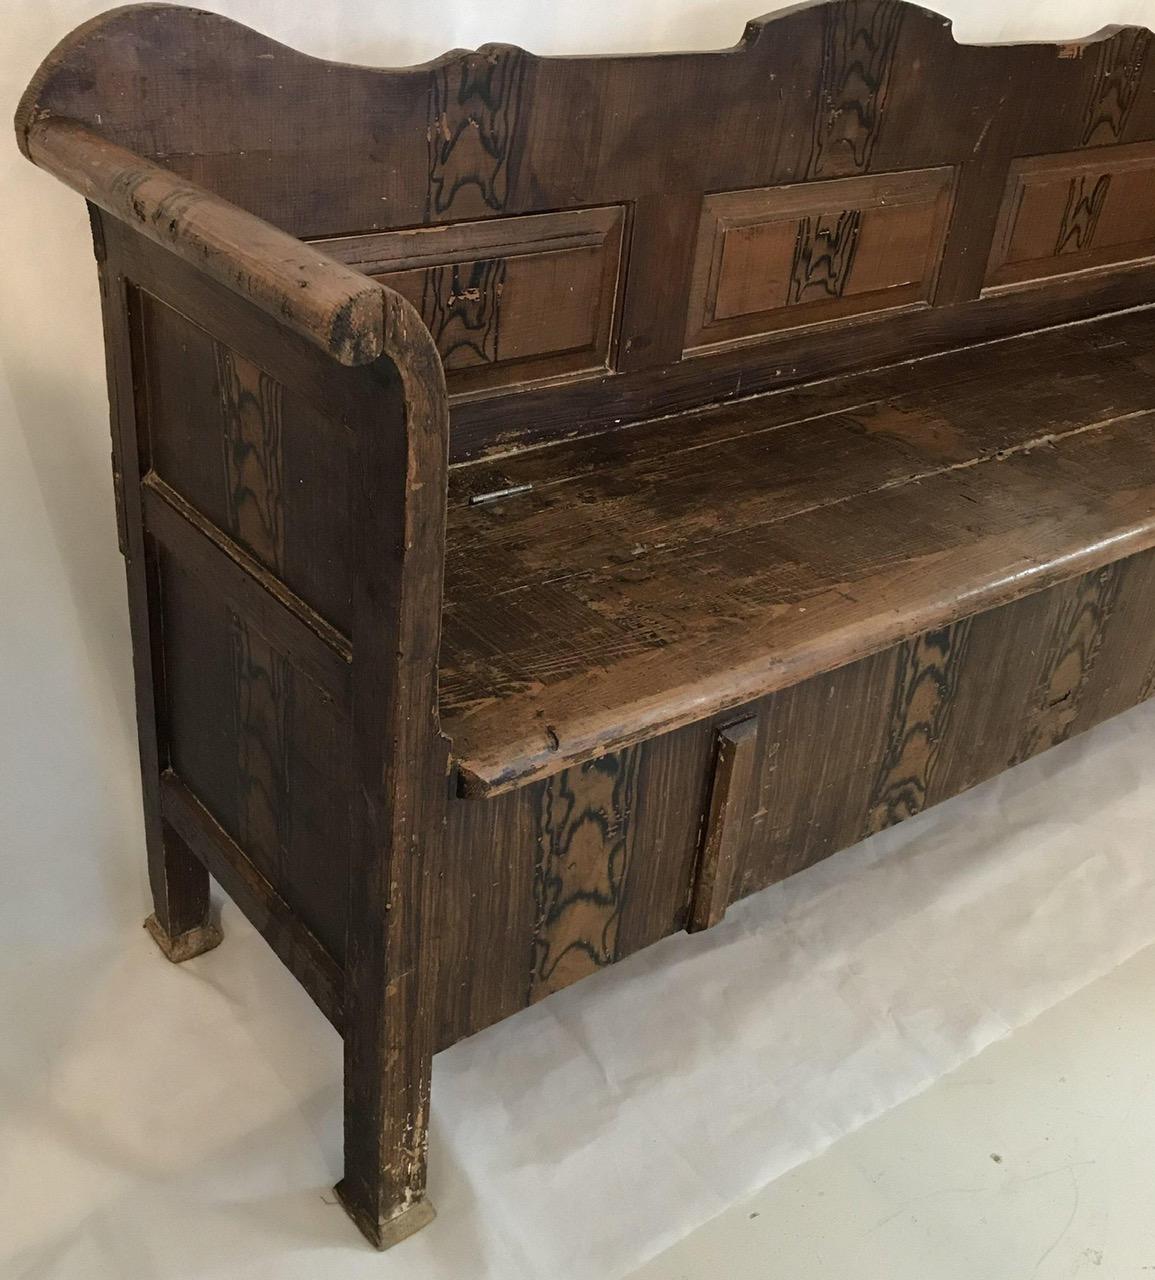 Handsome Antique Faux Painted Hungarian Pine Bench In Distressed Condition For Sale In Hopewell, NJ